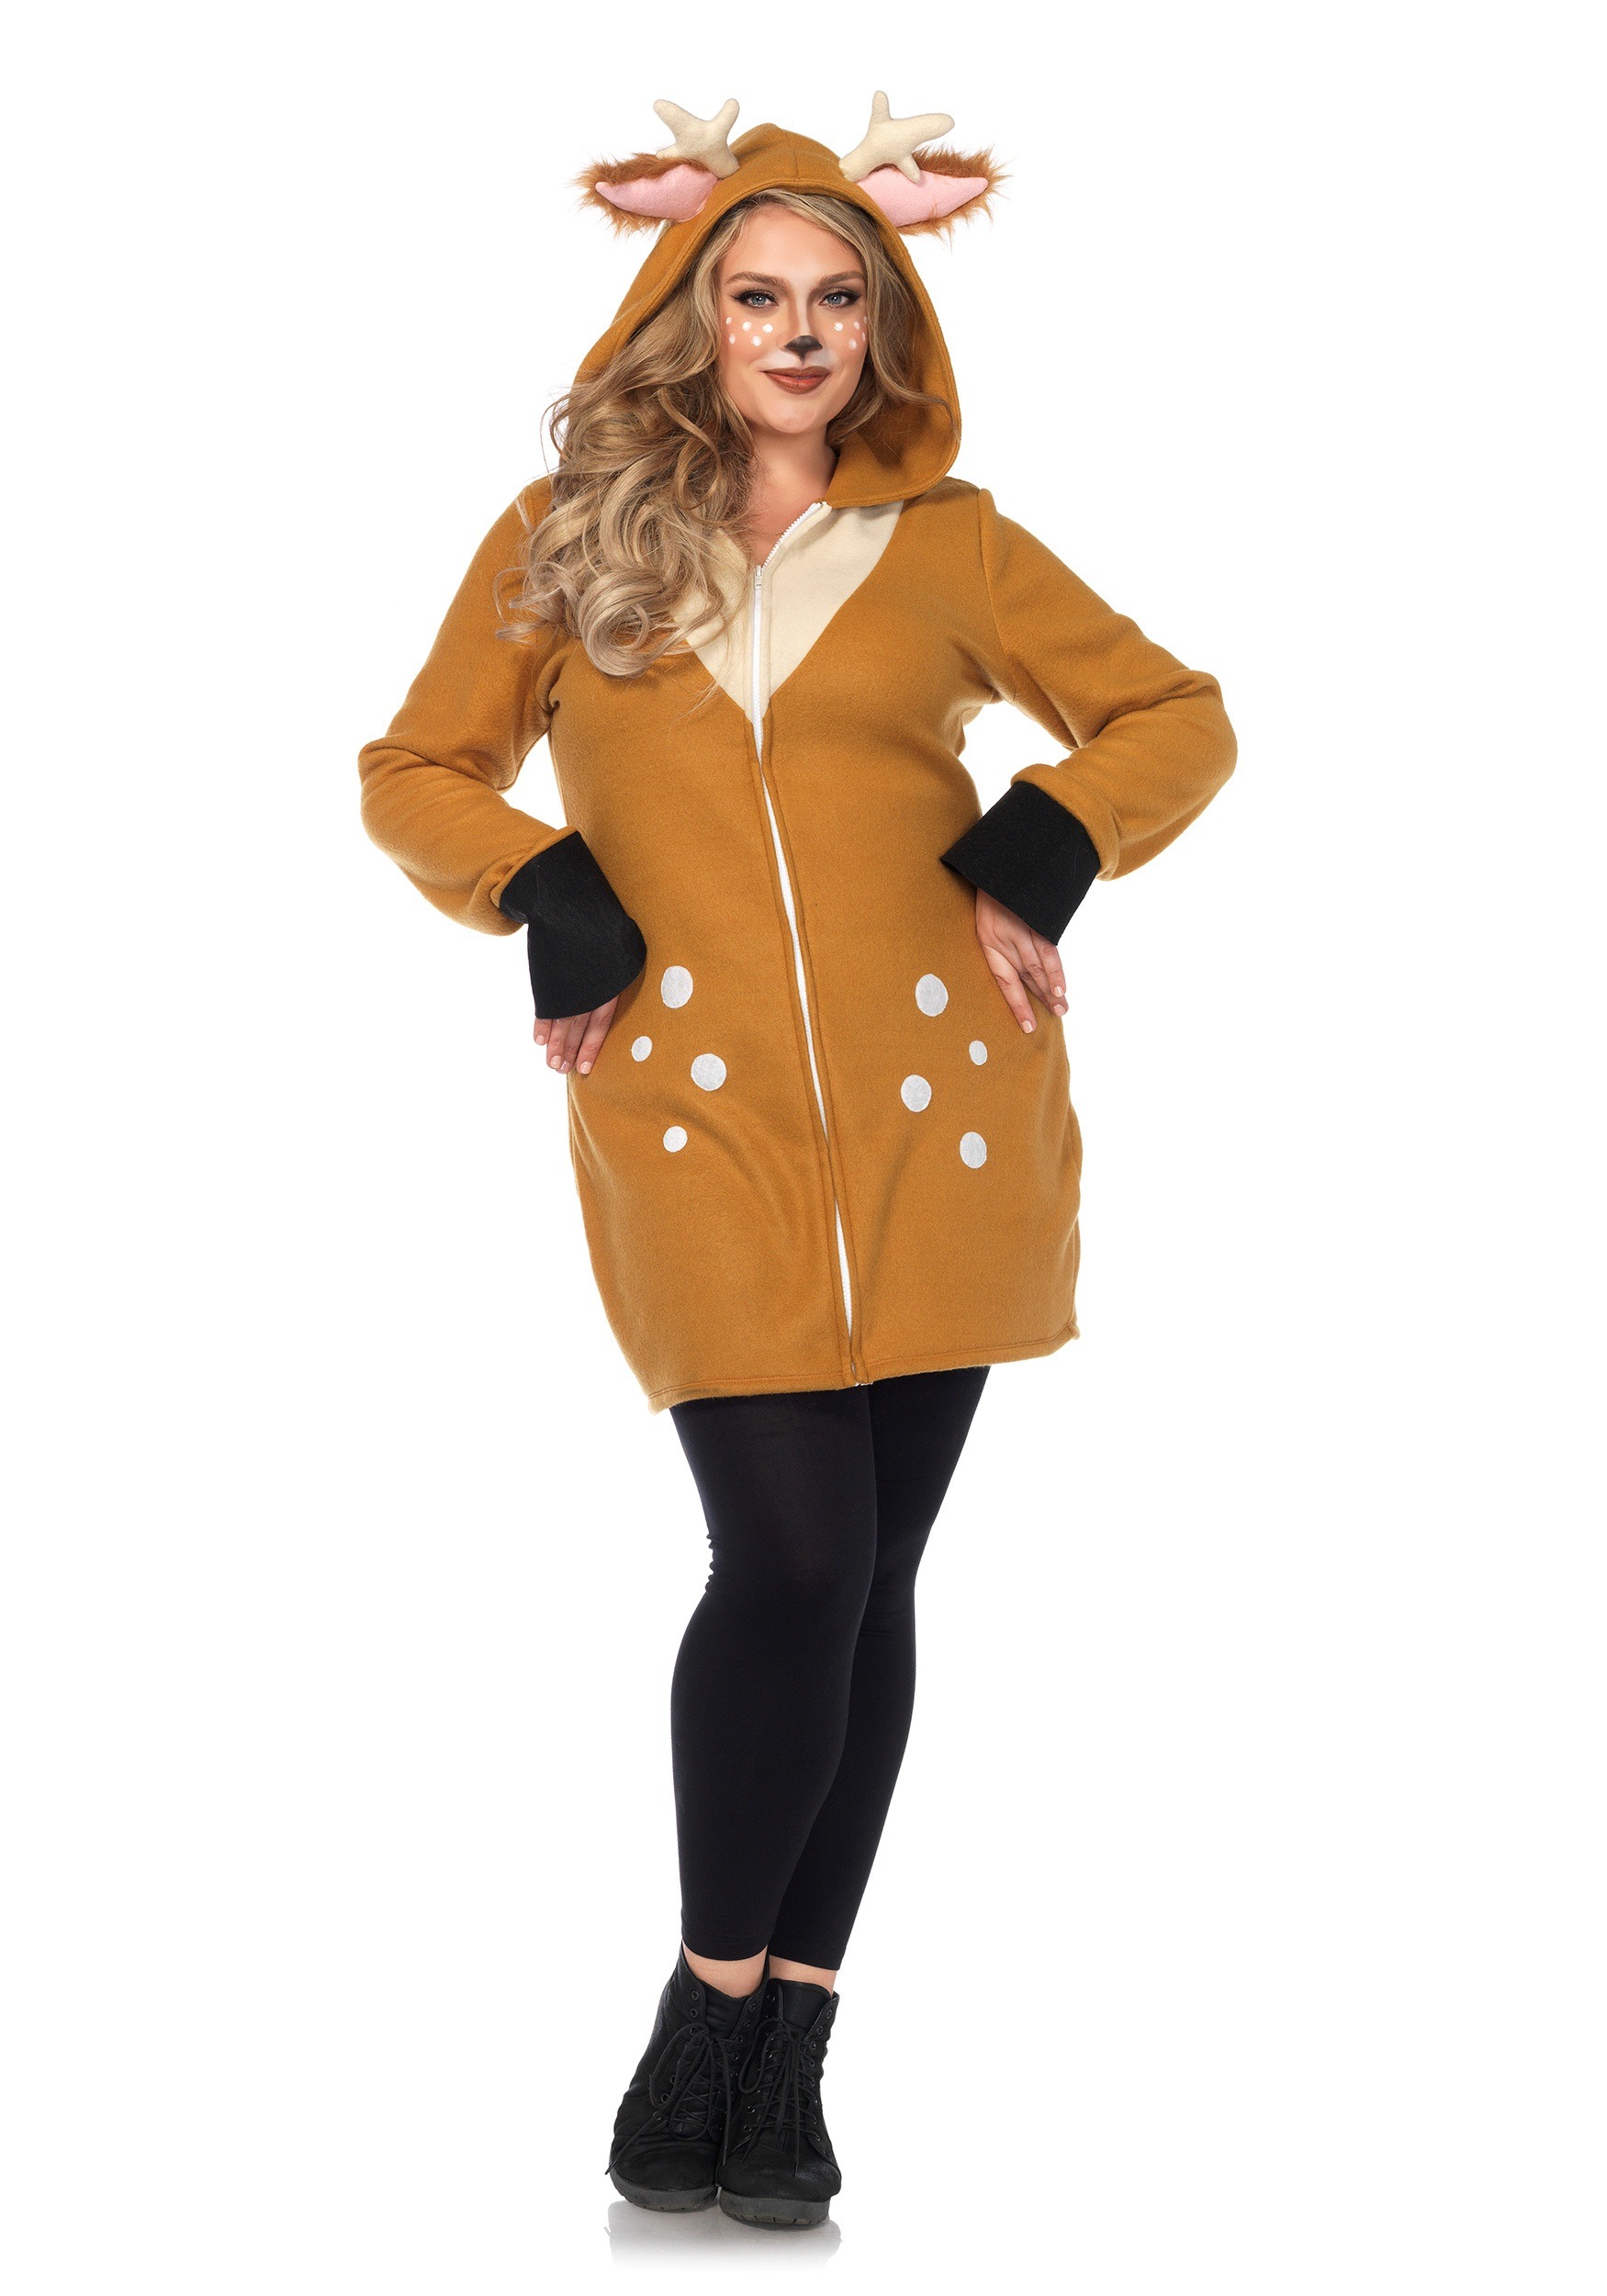 Cozy Fawn Plus Size Costume for Women